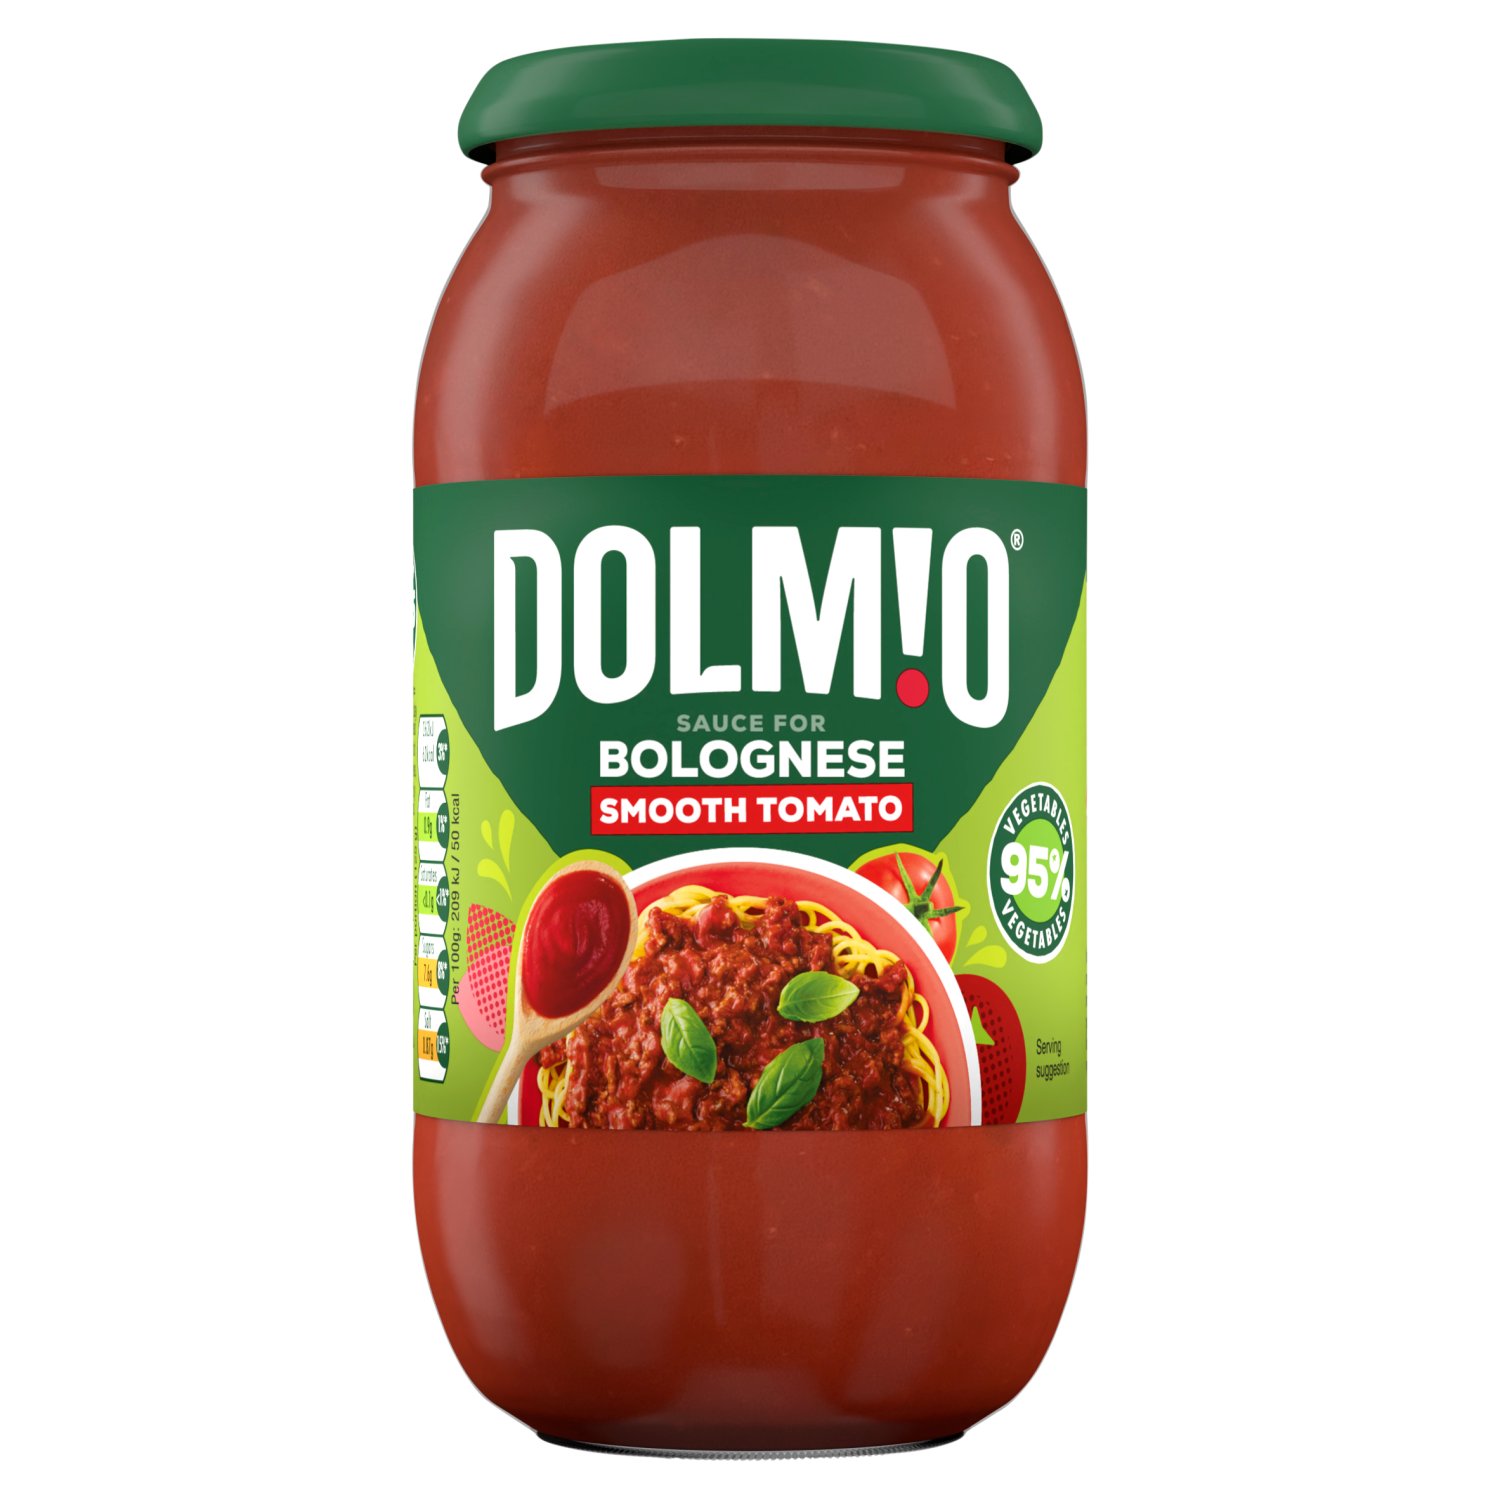 Dolmio sauce is the No1 Italian pasta sauce in the UK!* This Bolognese pasta sauce is made from a careful balance of smooth ripe tomatoes, basilico fresco and a pinch of herbs and spices. Try this perfectly smooth tomato pasta sauce that still contains 1 of your 5 a day. This sauce contains no artificial colours, flavours or preservatives and helps you create a delicious, wholesome meal that can be enjoyed any day of the week. Follow your dreams not recipes! Why not try adding your favourite veg, or even chilli to spice things up? We call it spag bol over here! *Dolmio is the Nation’s favourite Italian Wet Cooking Sauce - based on Nielsen RMS sales data for the 12month period ending 05.04.2023 (Copyright © 2023, Nielsen).